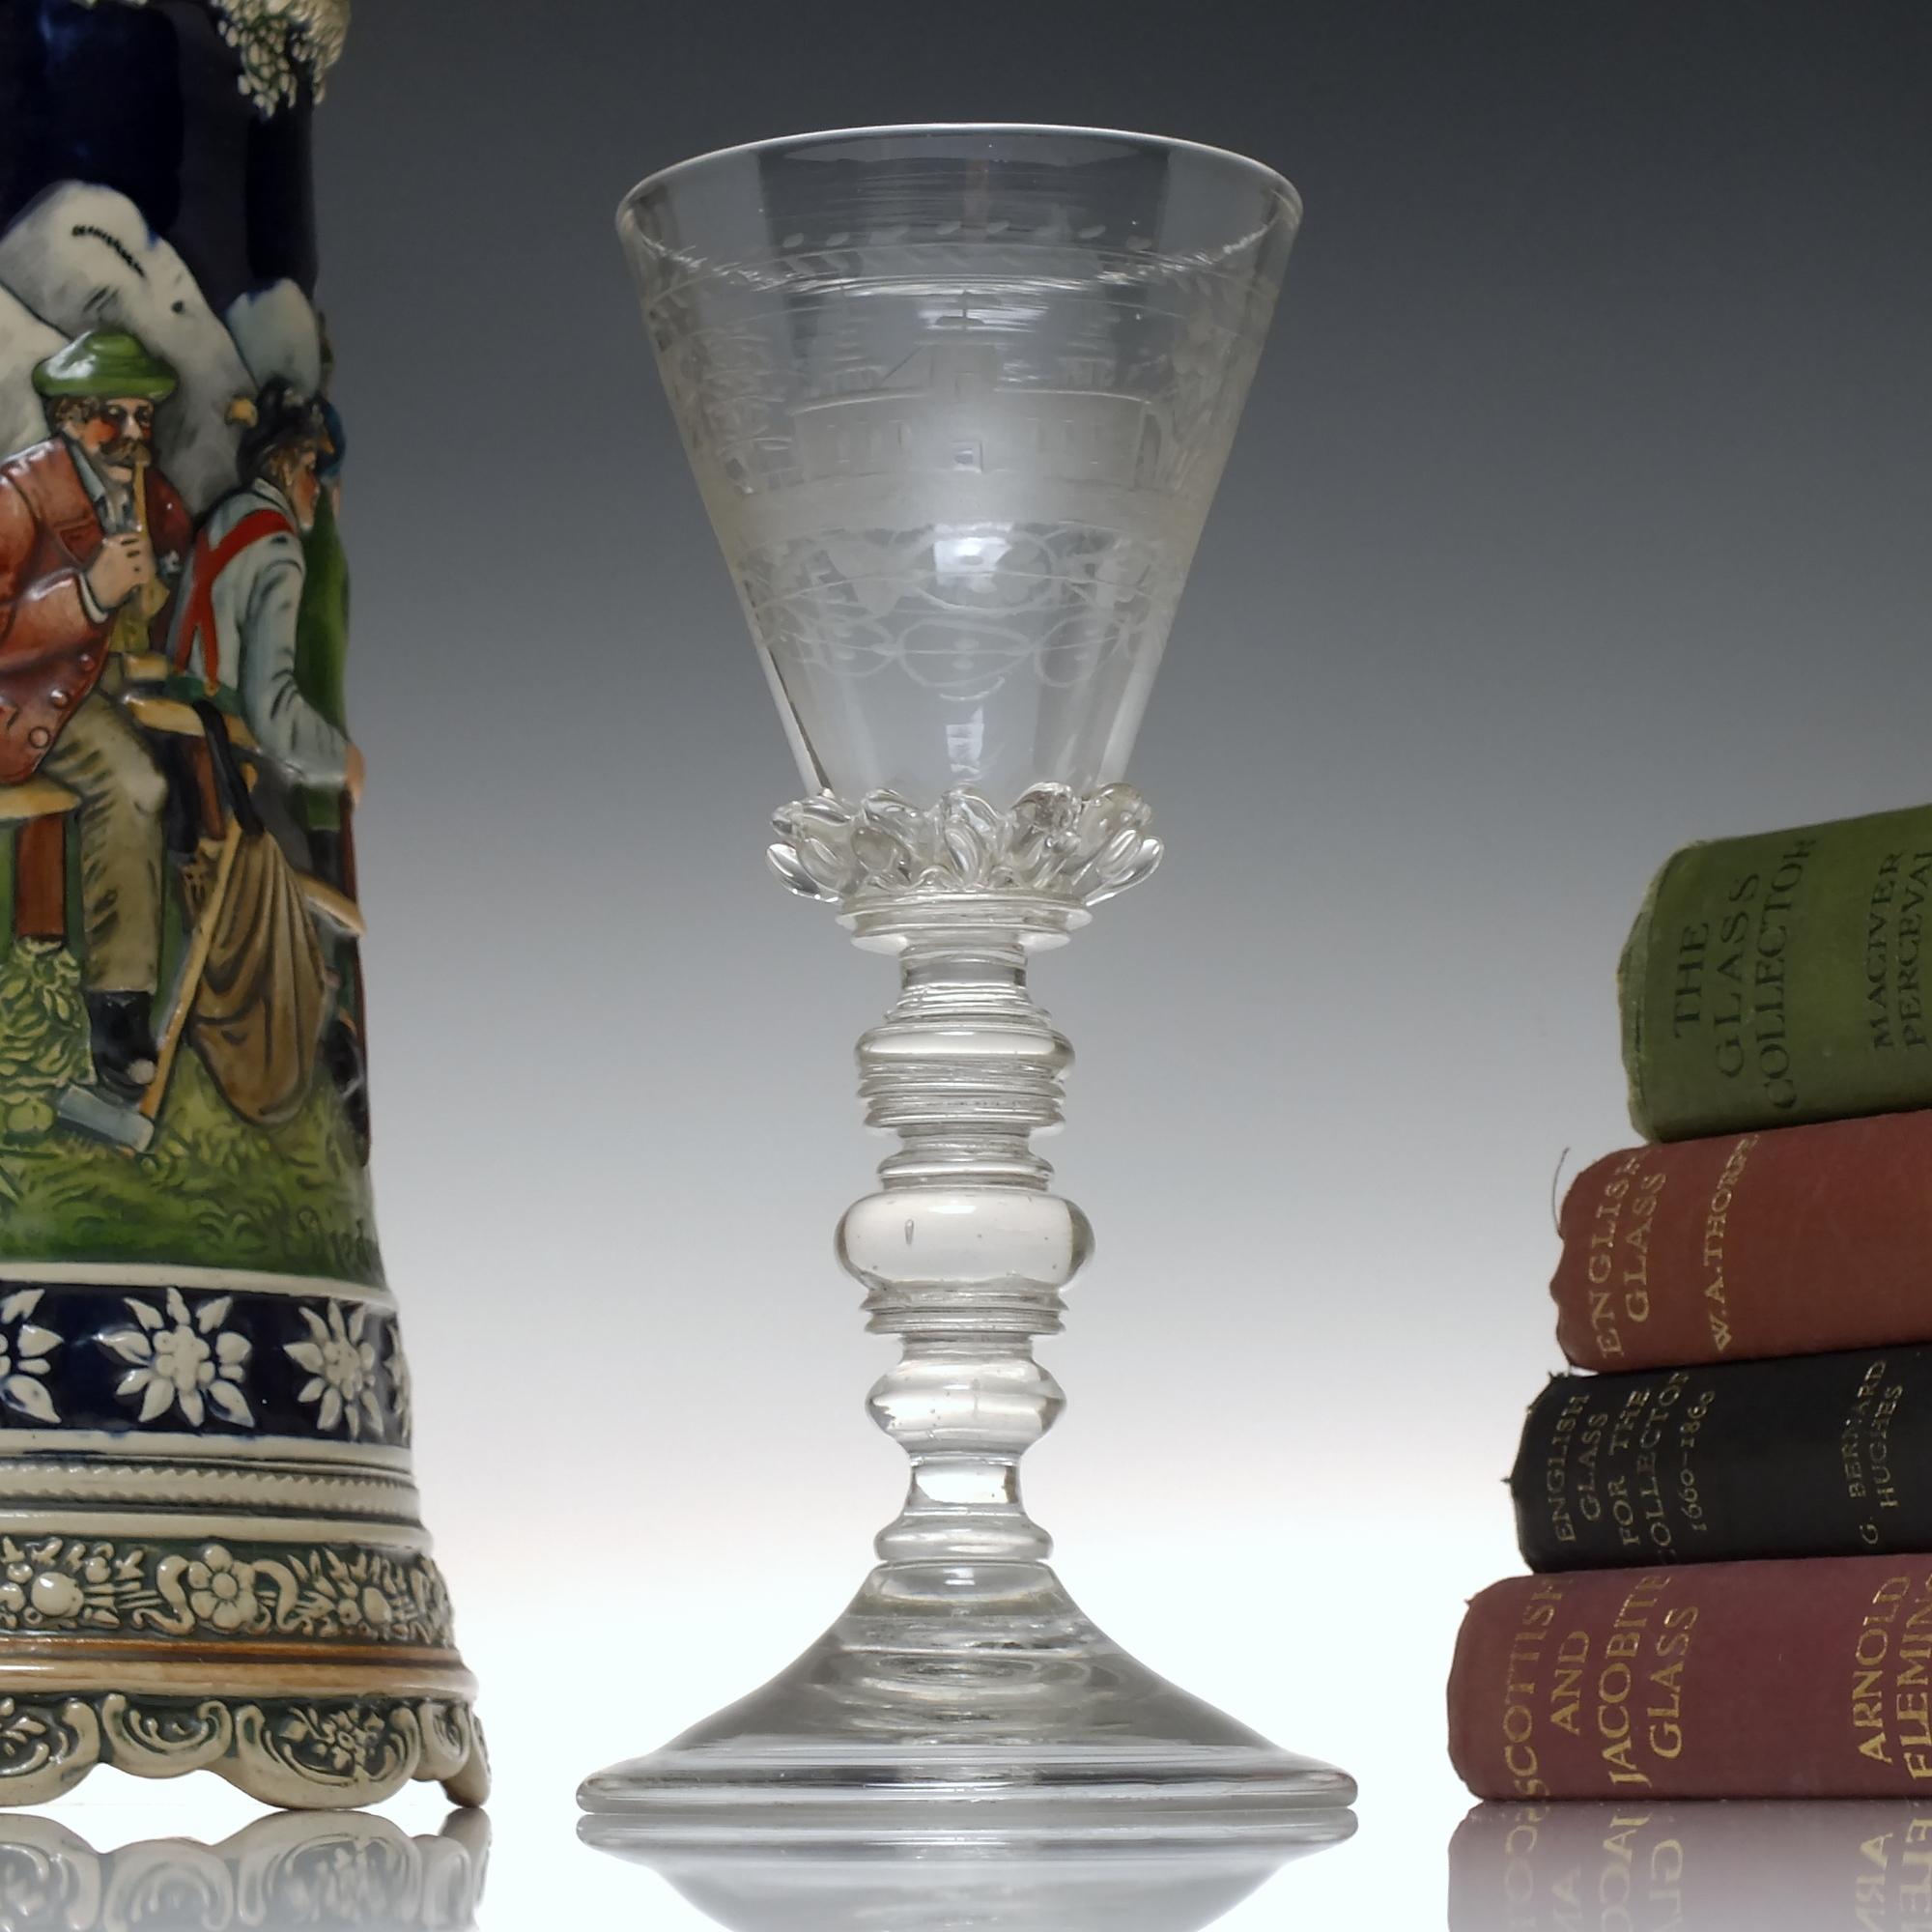 Technical Description

A fantastic 17th Century Bohemian glass goblet dating to between c1680-90.

It has a spiked gadrooned conical bowl with classic Bohemian engravings including castles, flowers, foliage and fruit. Sits on multi knopped stem